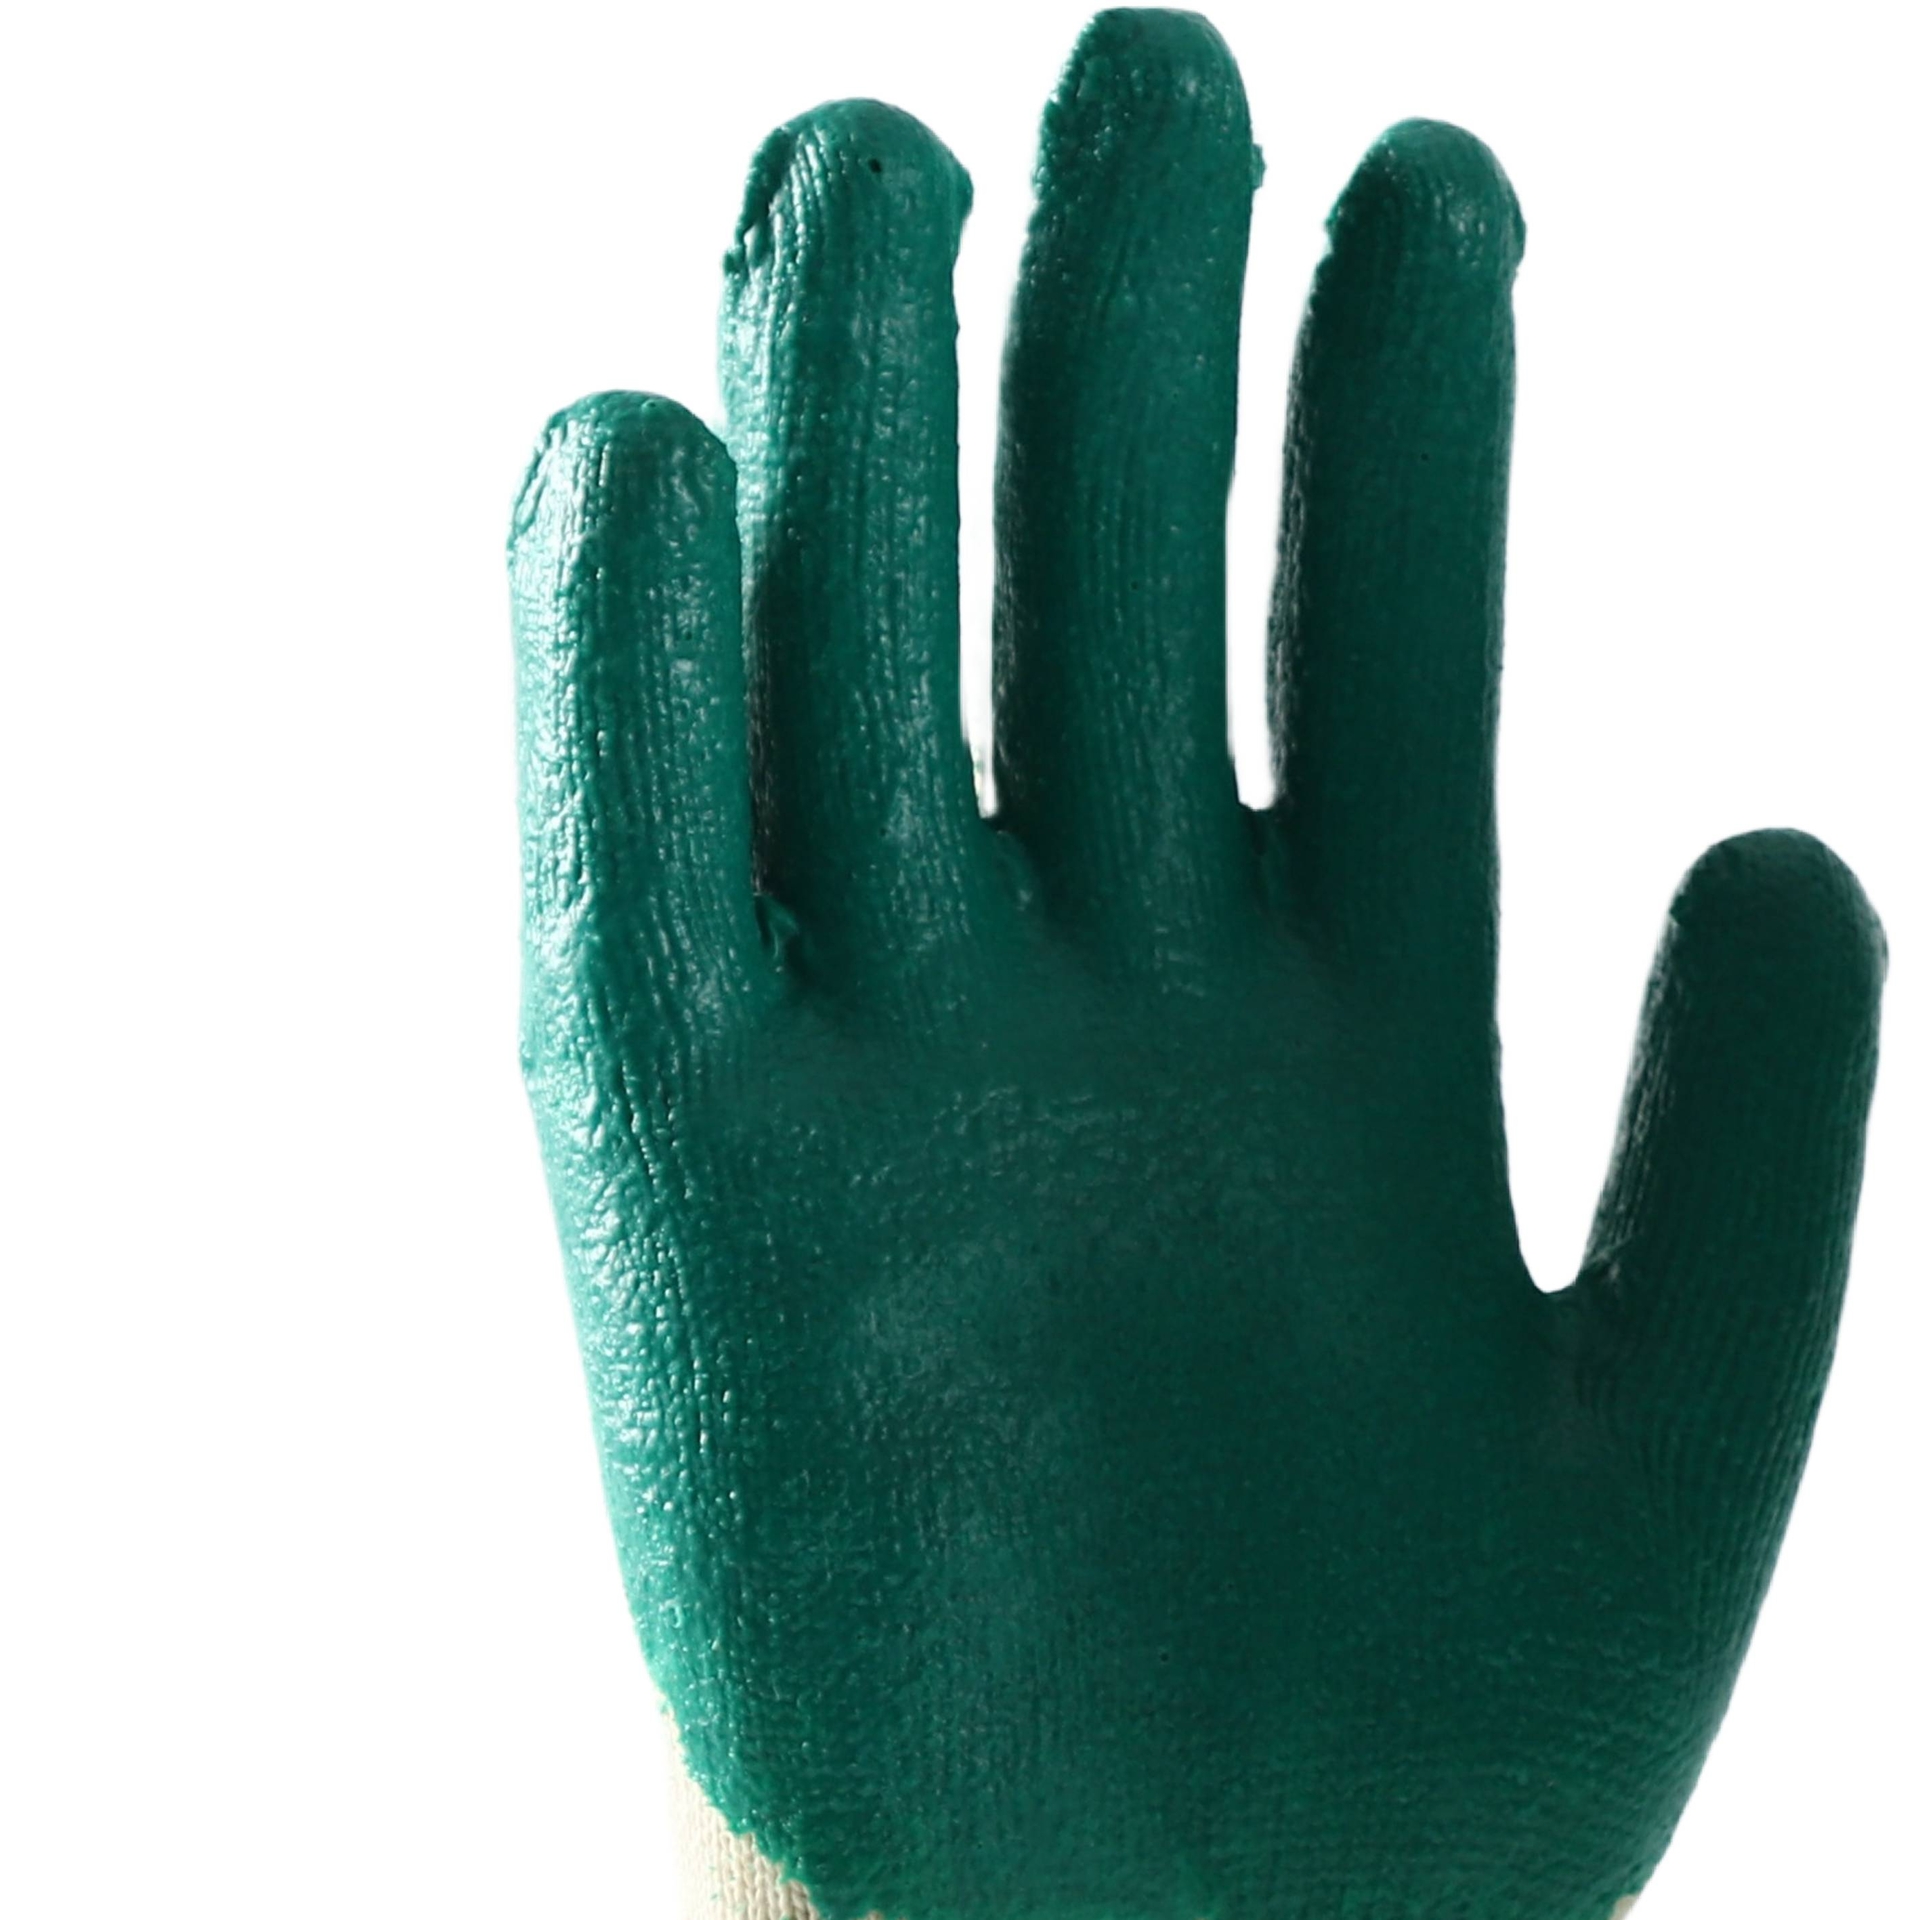                 White cotton with green latex smooth coating gloves            